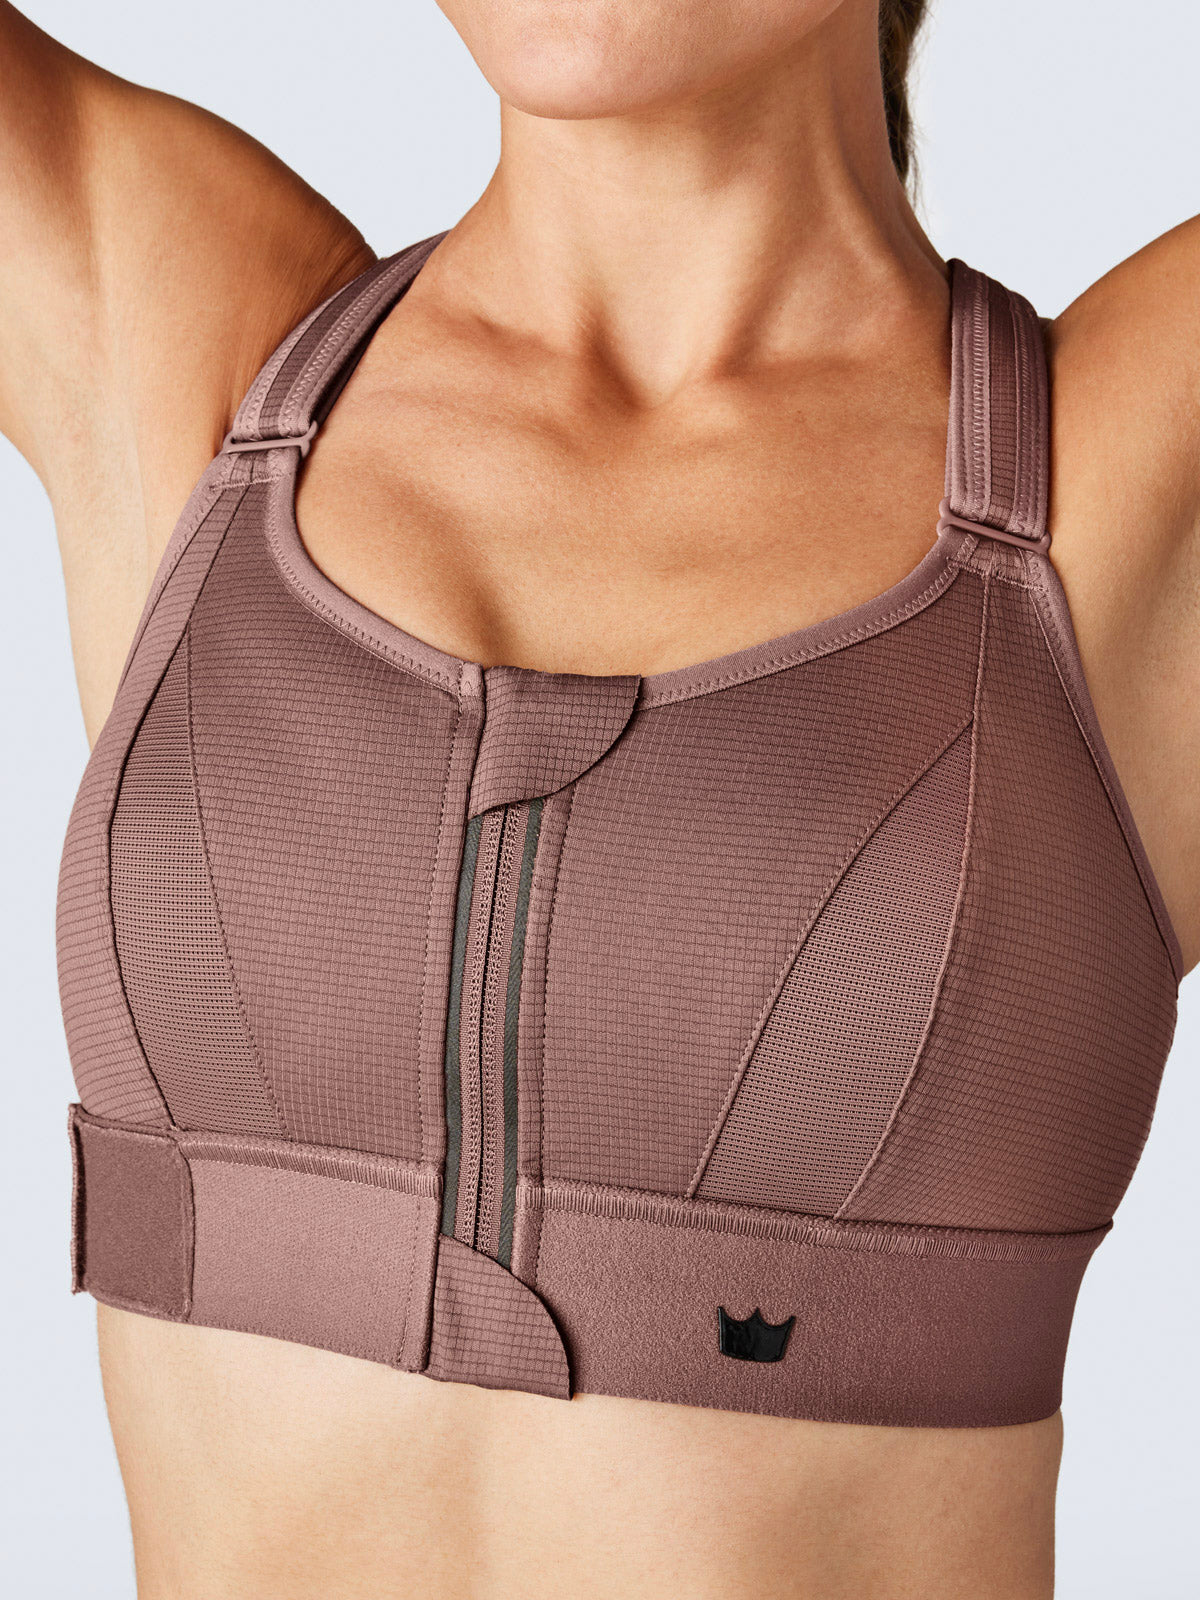 The Ultimate Sports Bra - Scientifically Proven to be the best sports -  SHEFIT